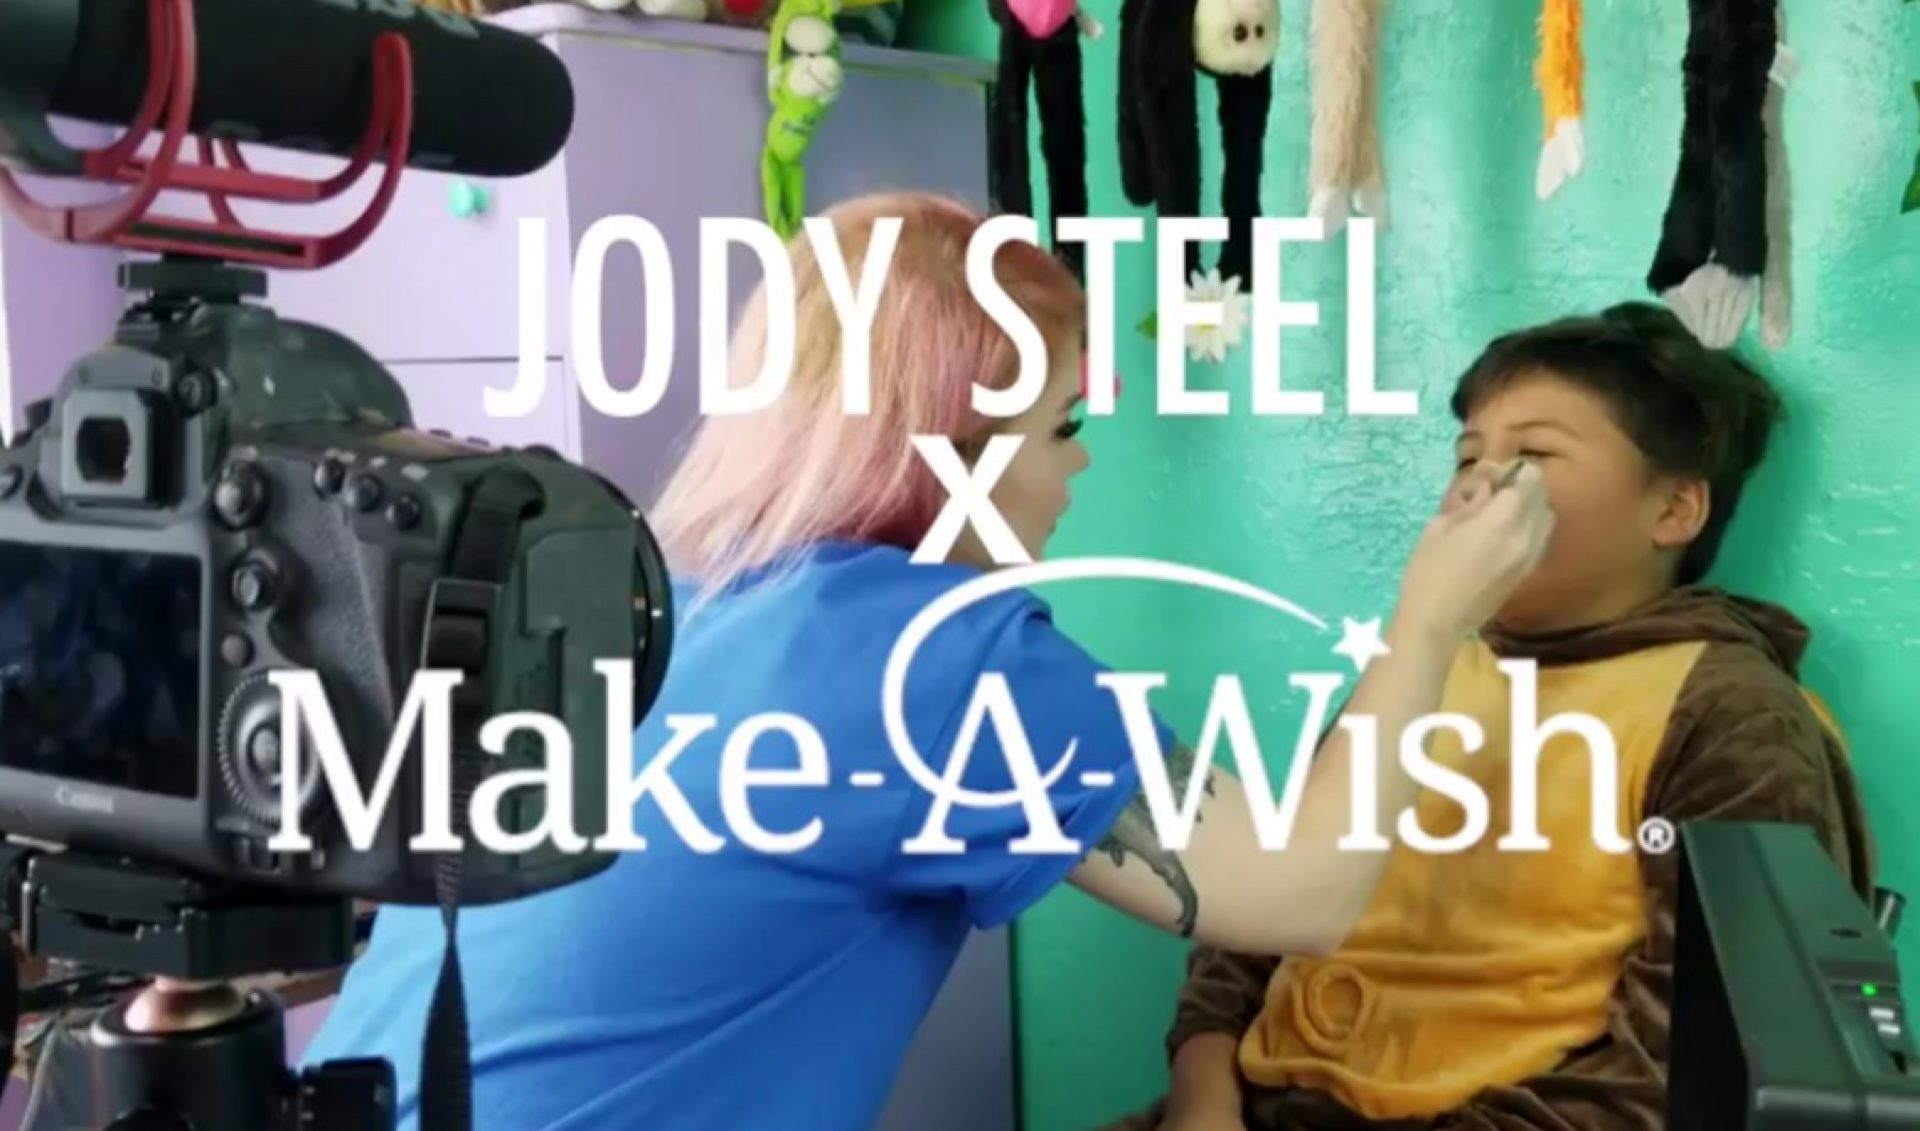 Body Artist Jody Steel To Launch Make-A-Wish Fundraiser On Her Massively-Followed Facebook Page